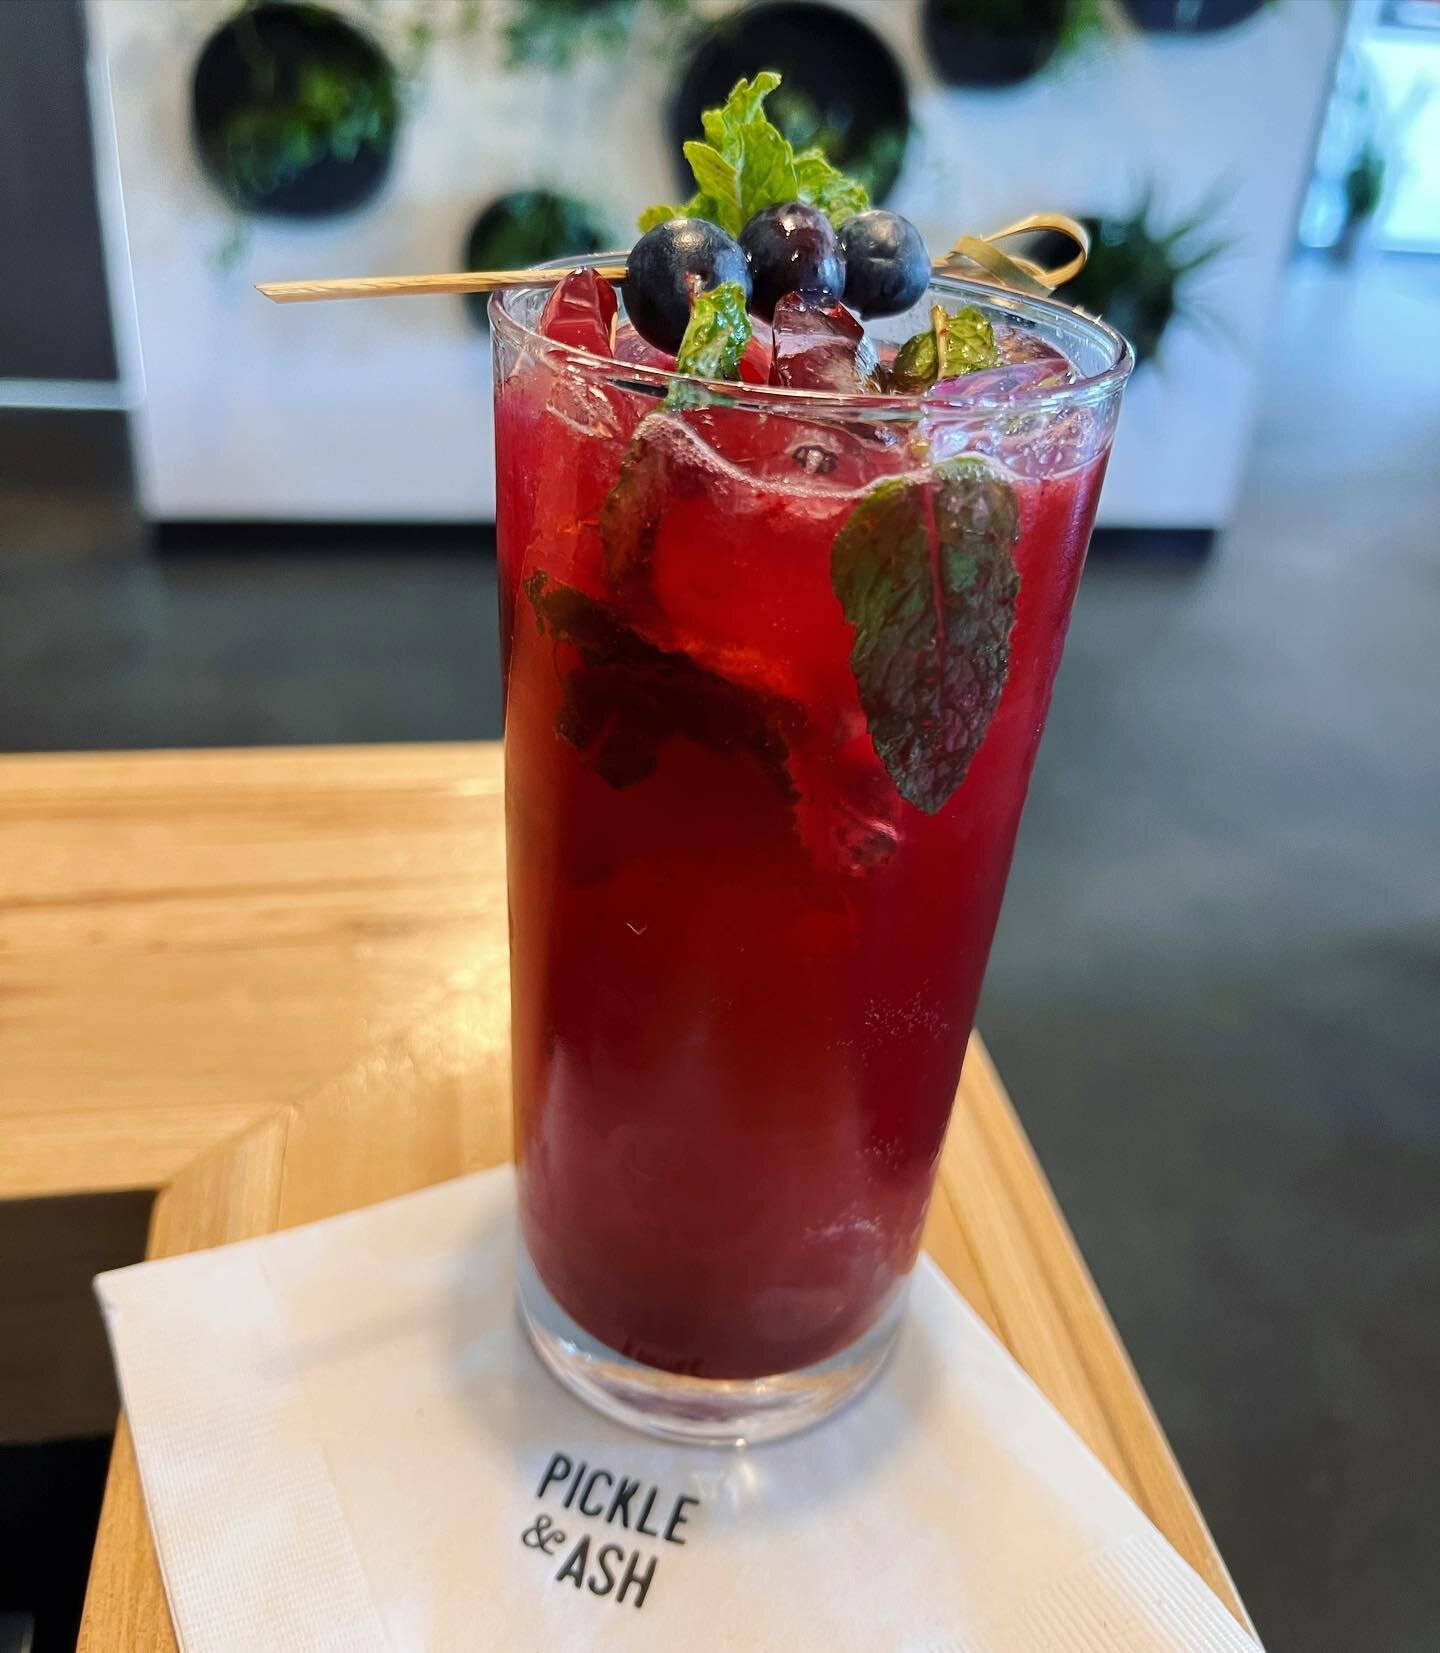 Blueberry Mojito made with our house made blueberry syrup, fresh lime juice, muddled mint, rum &amp; club soda. It tastes as refreshing as it sounds!